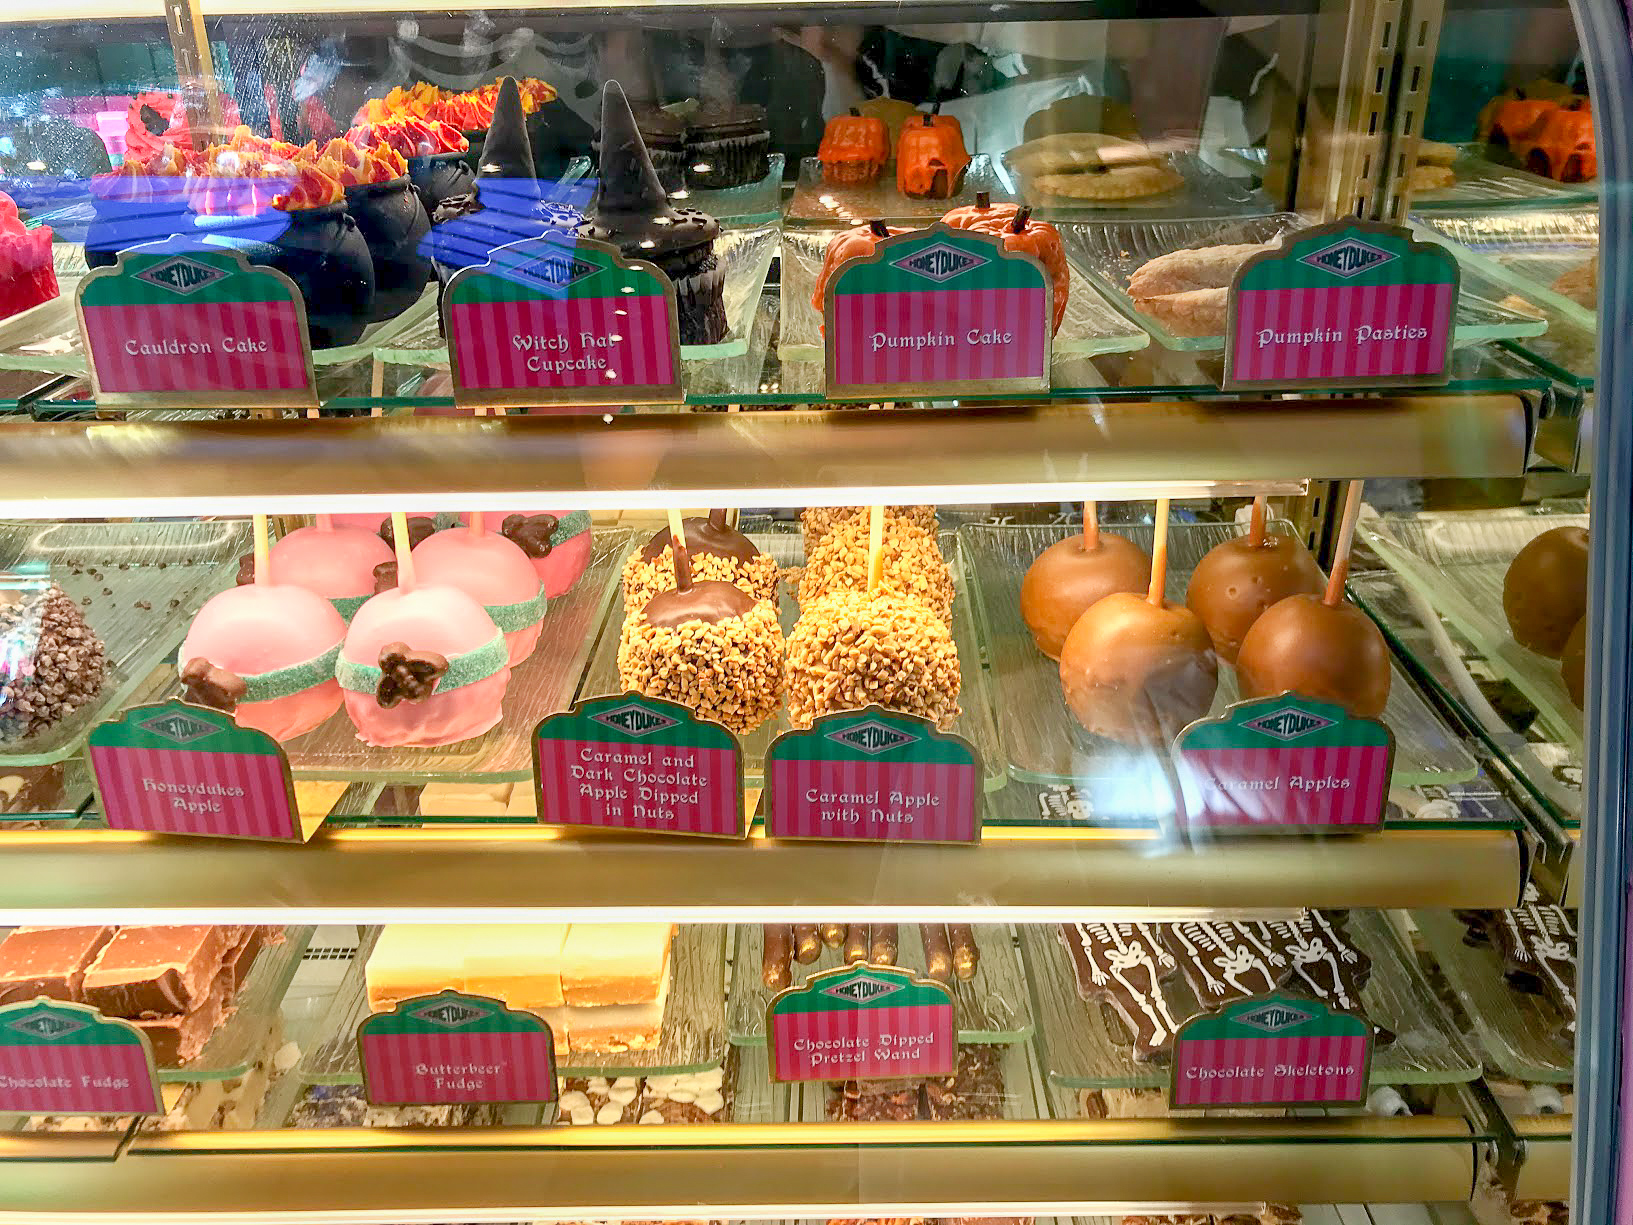 Sweet treats in Honeydukes including toffee apples and brownies